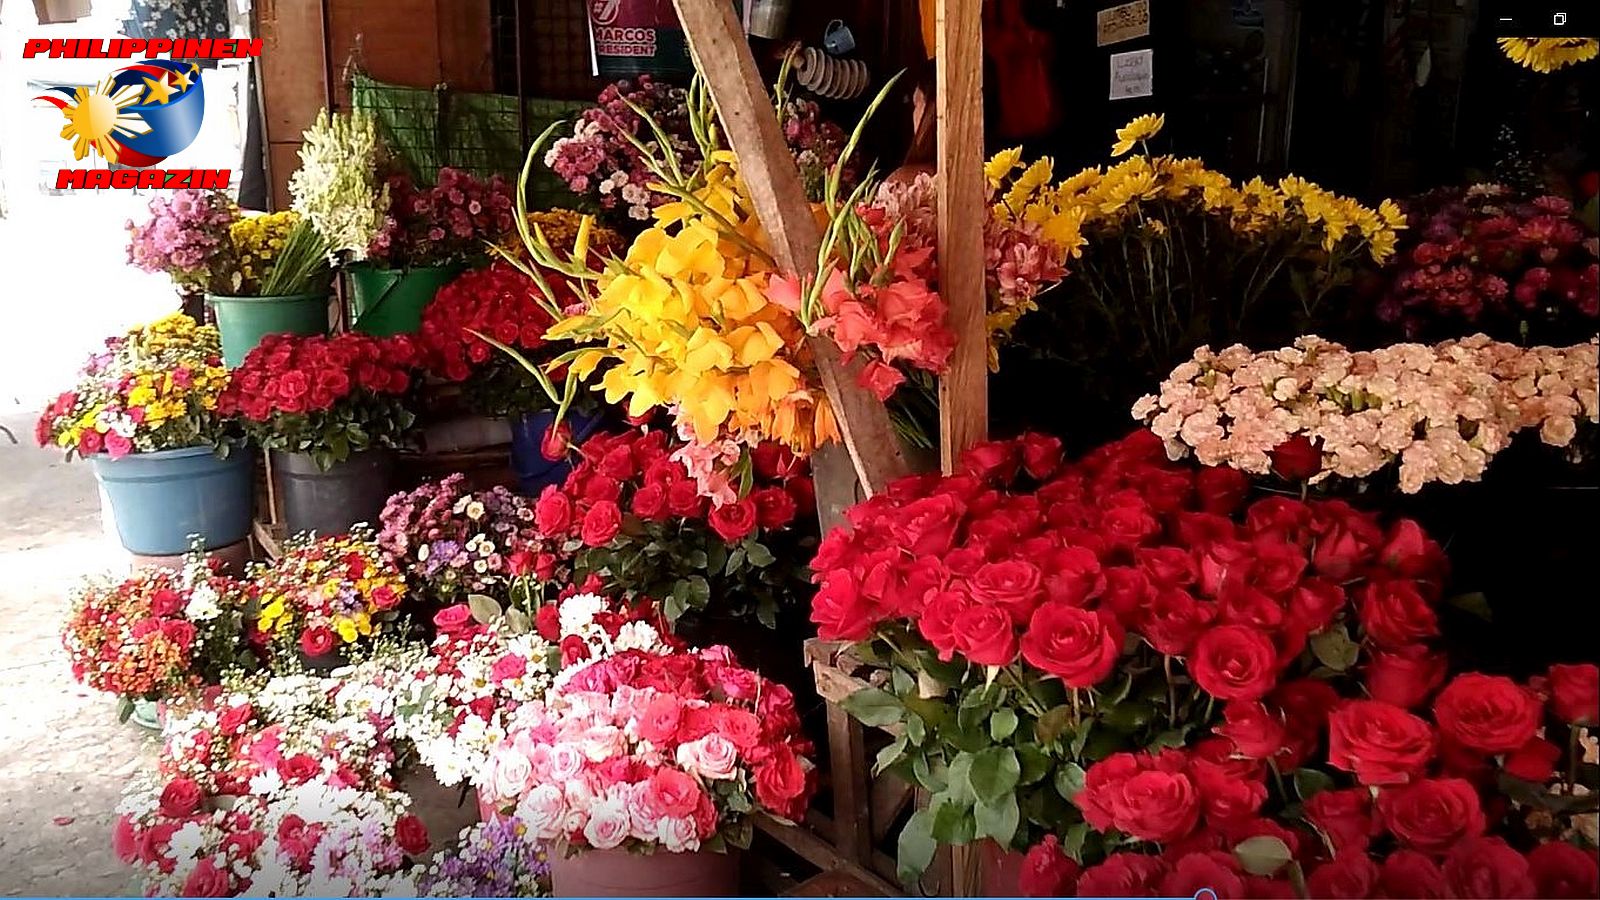 SIGHTS OF CAGAYAN DE ORO CITY & NORTHERN MINDANAO - IMAGE OF THE DAY - Fresh Cut Flower Stall  Photo by Sir Dieter Sokoll, KOR